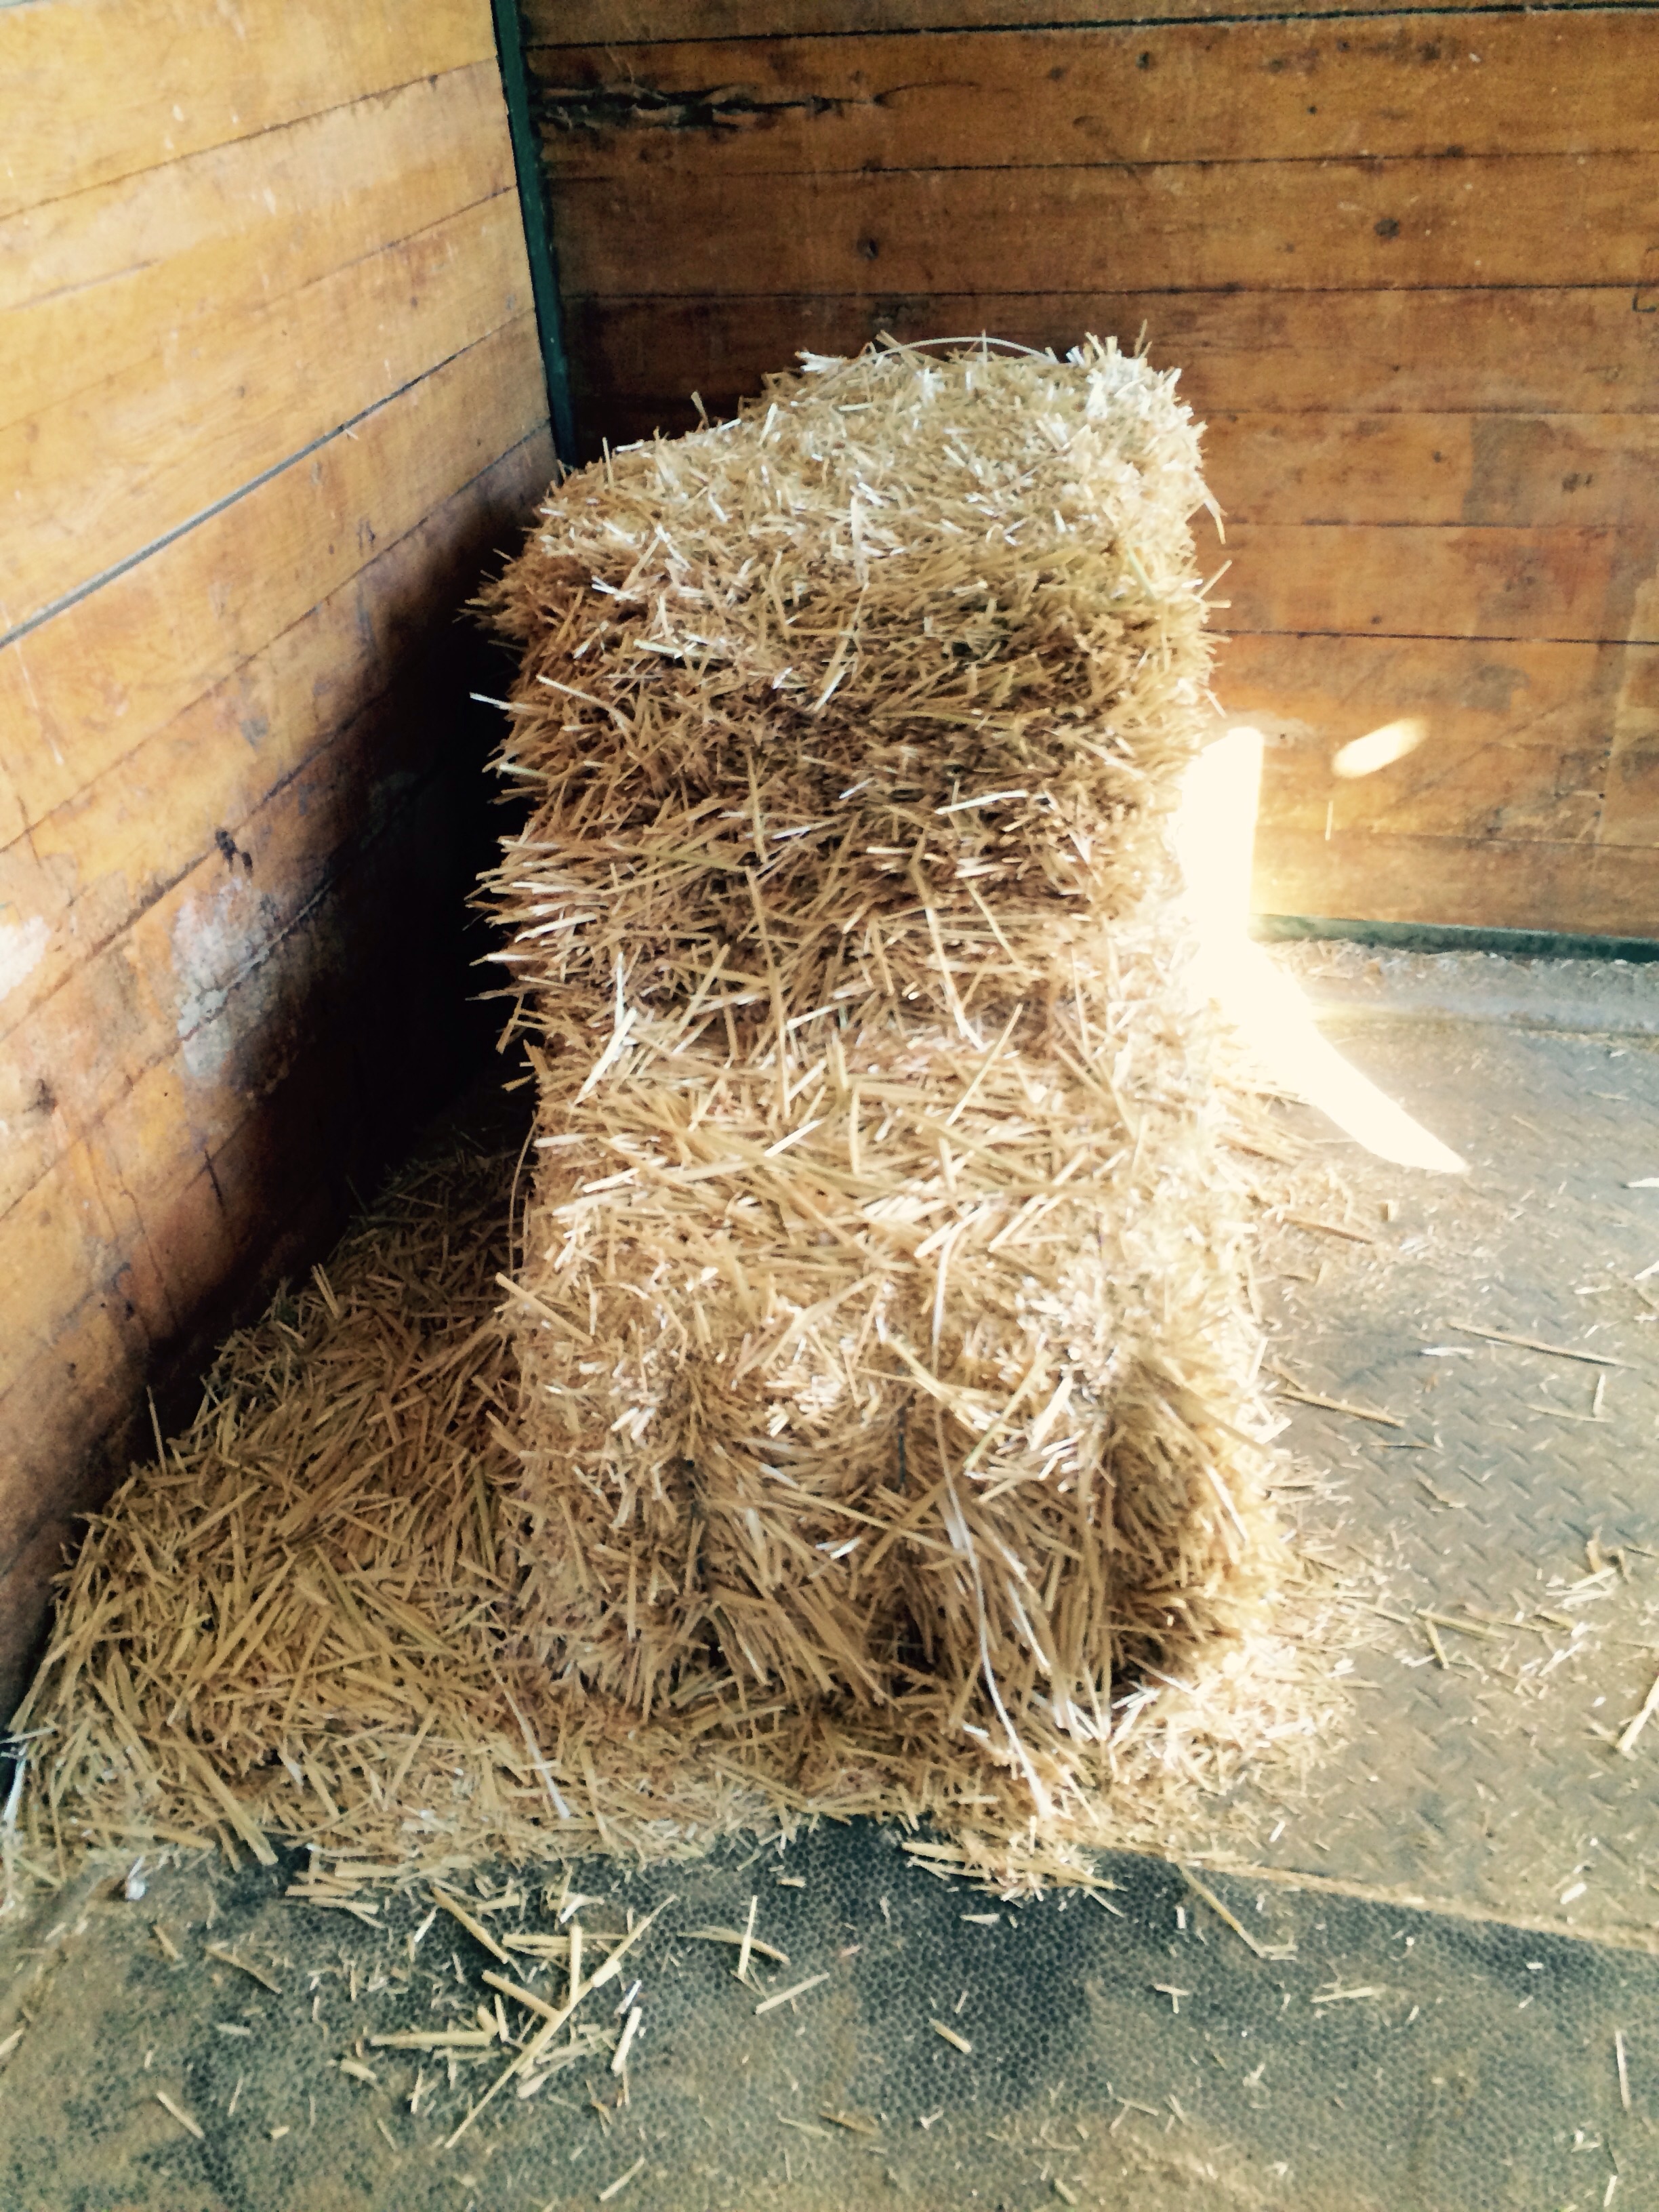 We repurpose everything we can on the farm here we use fresh straw to make bedding and nesting boxes and after we change out for fresh straw we repurpose used straw for onion beds to insulate and fertilize